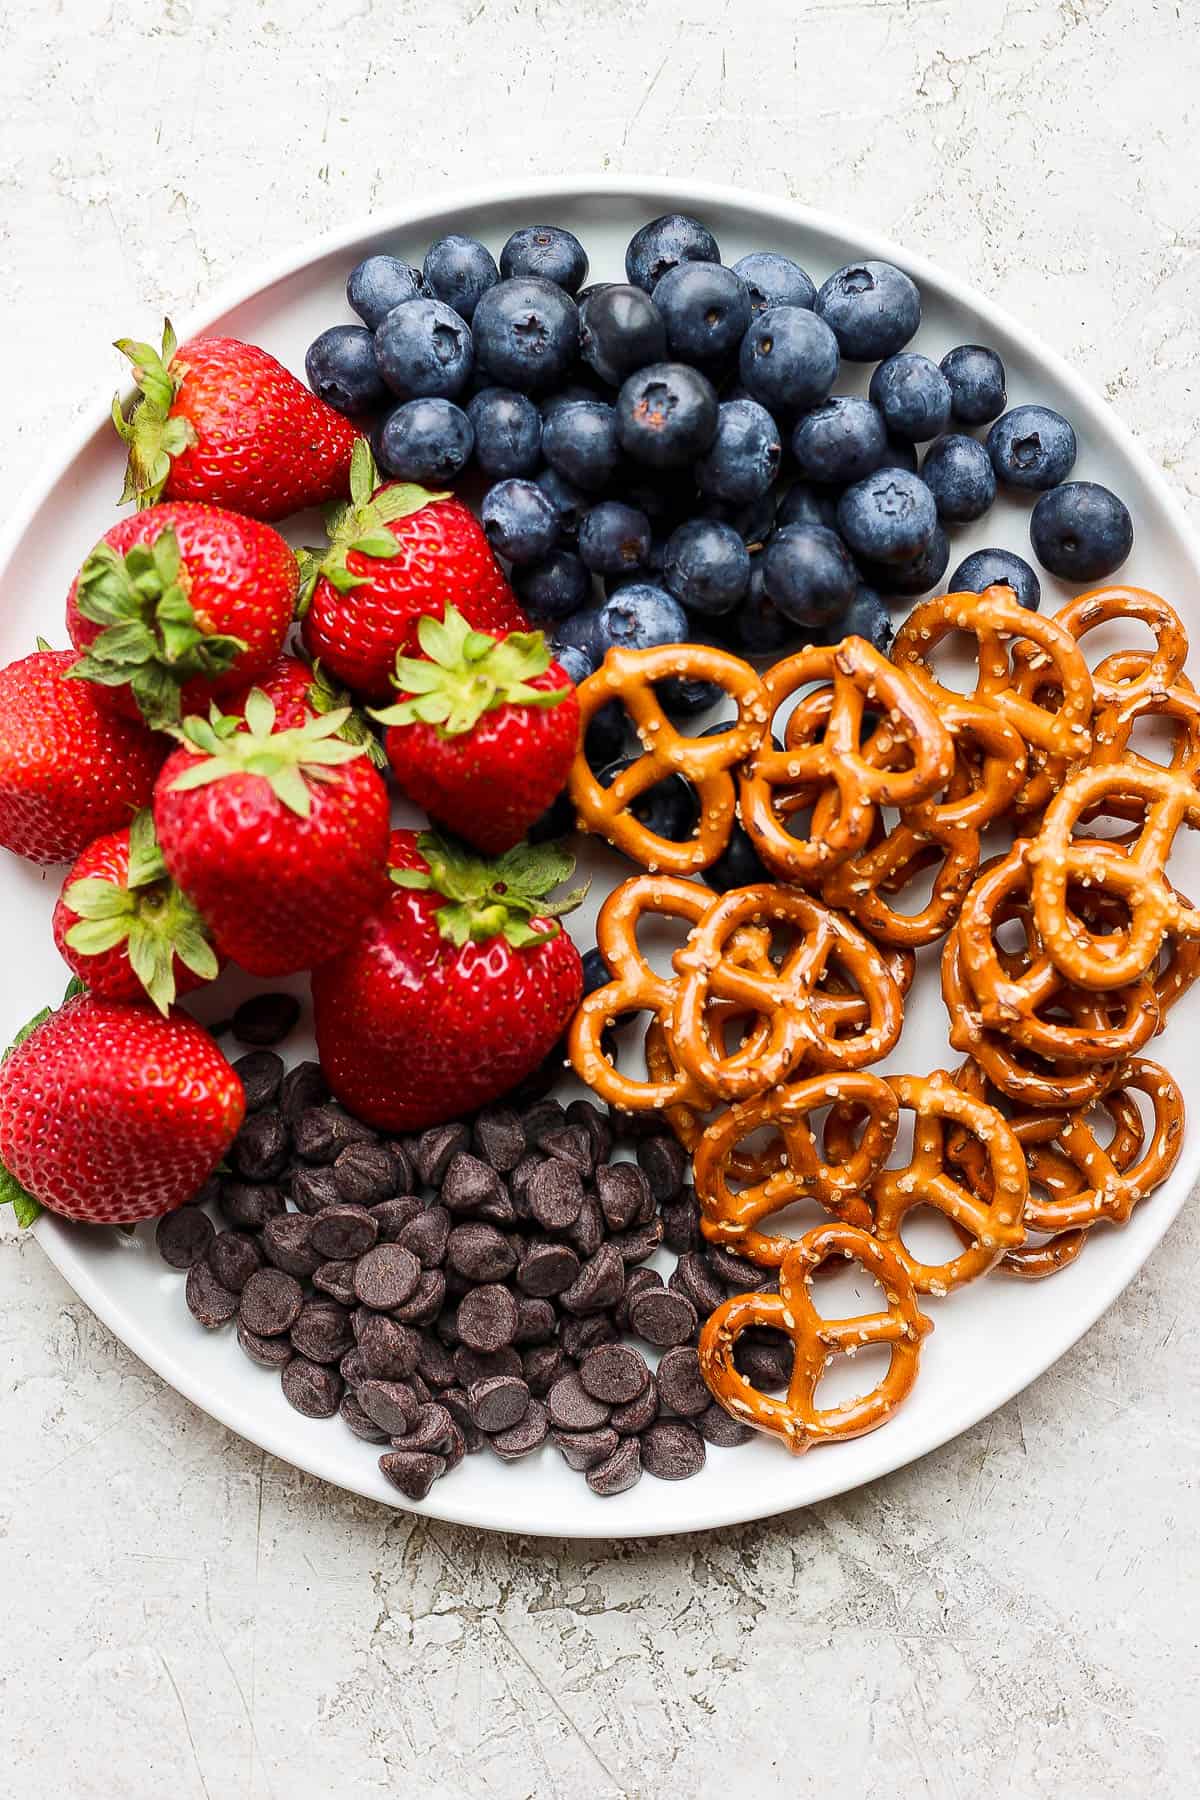 A plate full of strawberries, chocolate chips, pretzels, and blueberries.